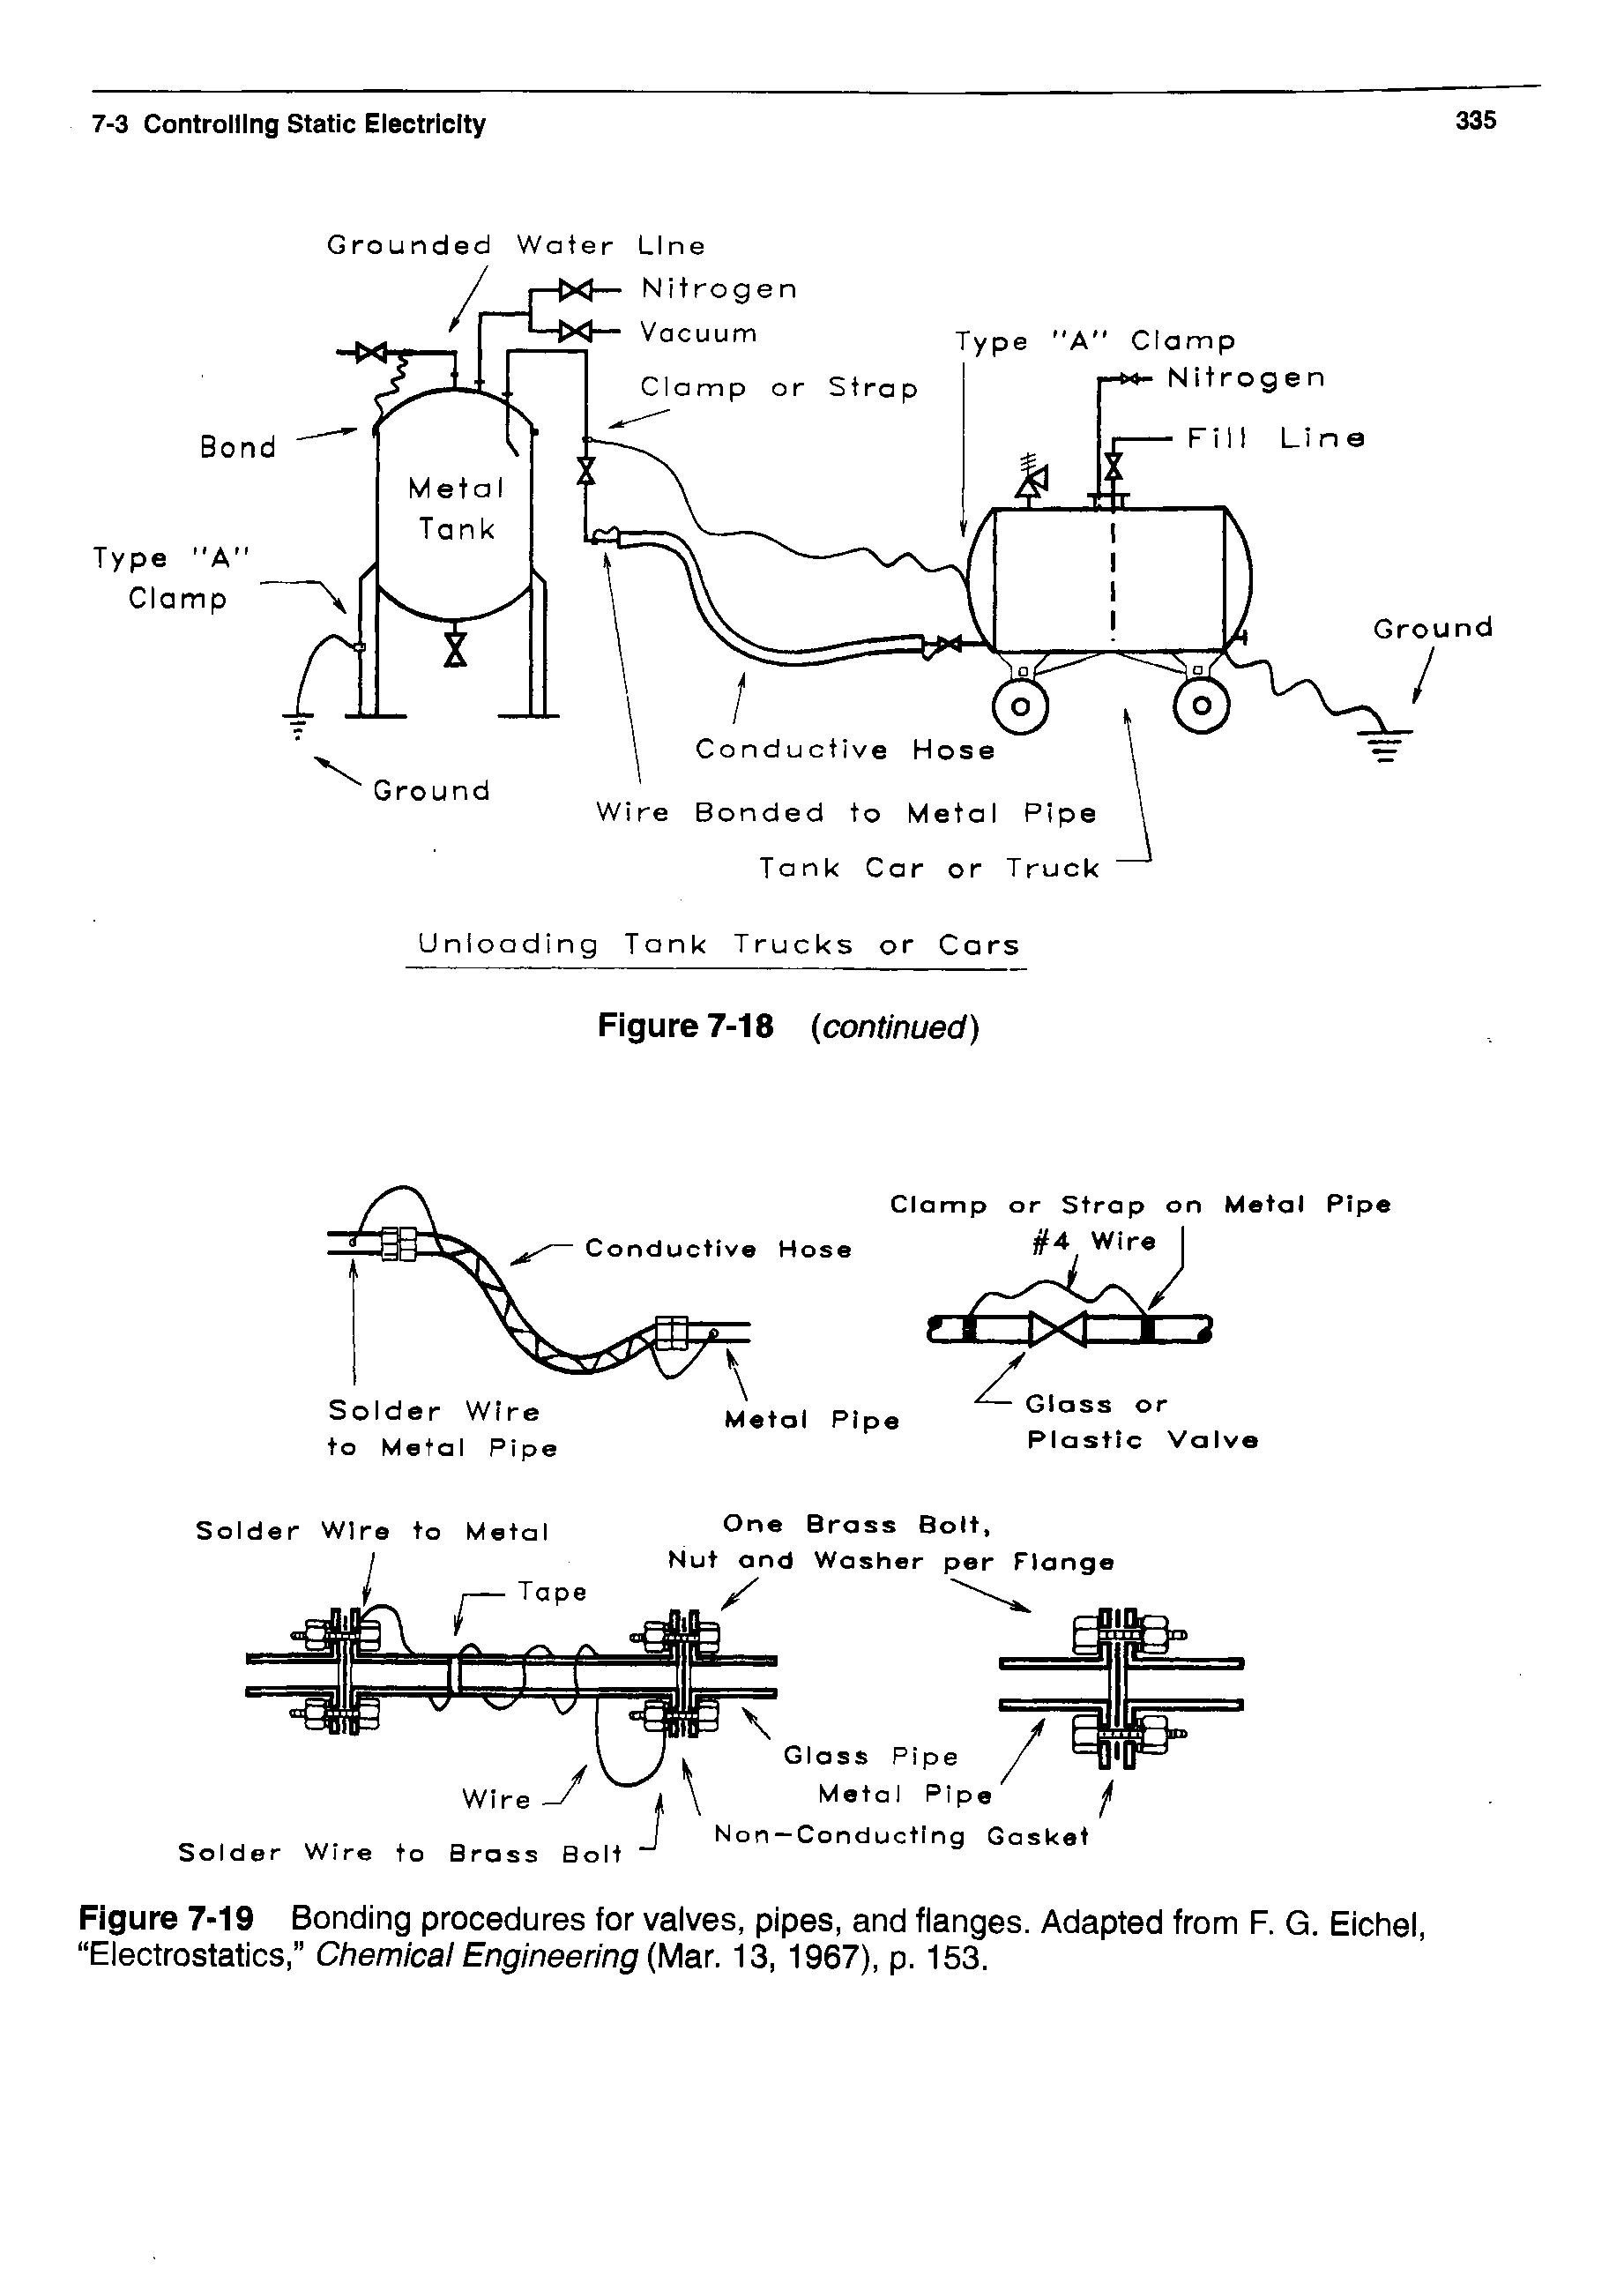 Figure 7-19 Bonding procedures for valves, pipes, and flanges. Adapted from F. G. Eichel, Electrostatics, Chemical Engineering (Mar. 13, 1967), p. 153.